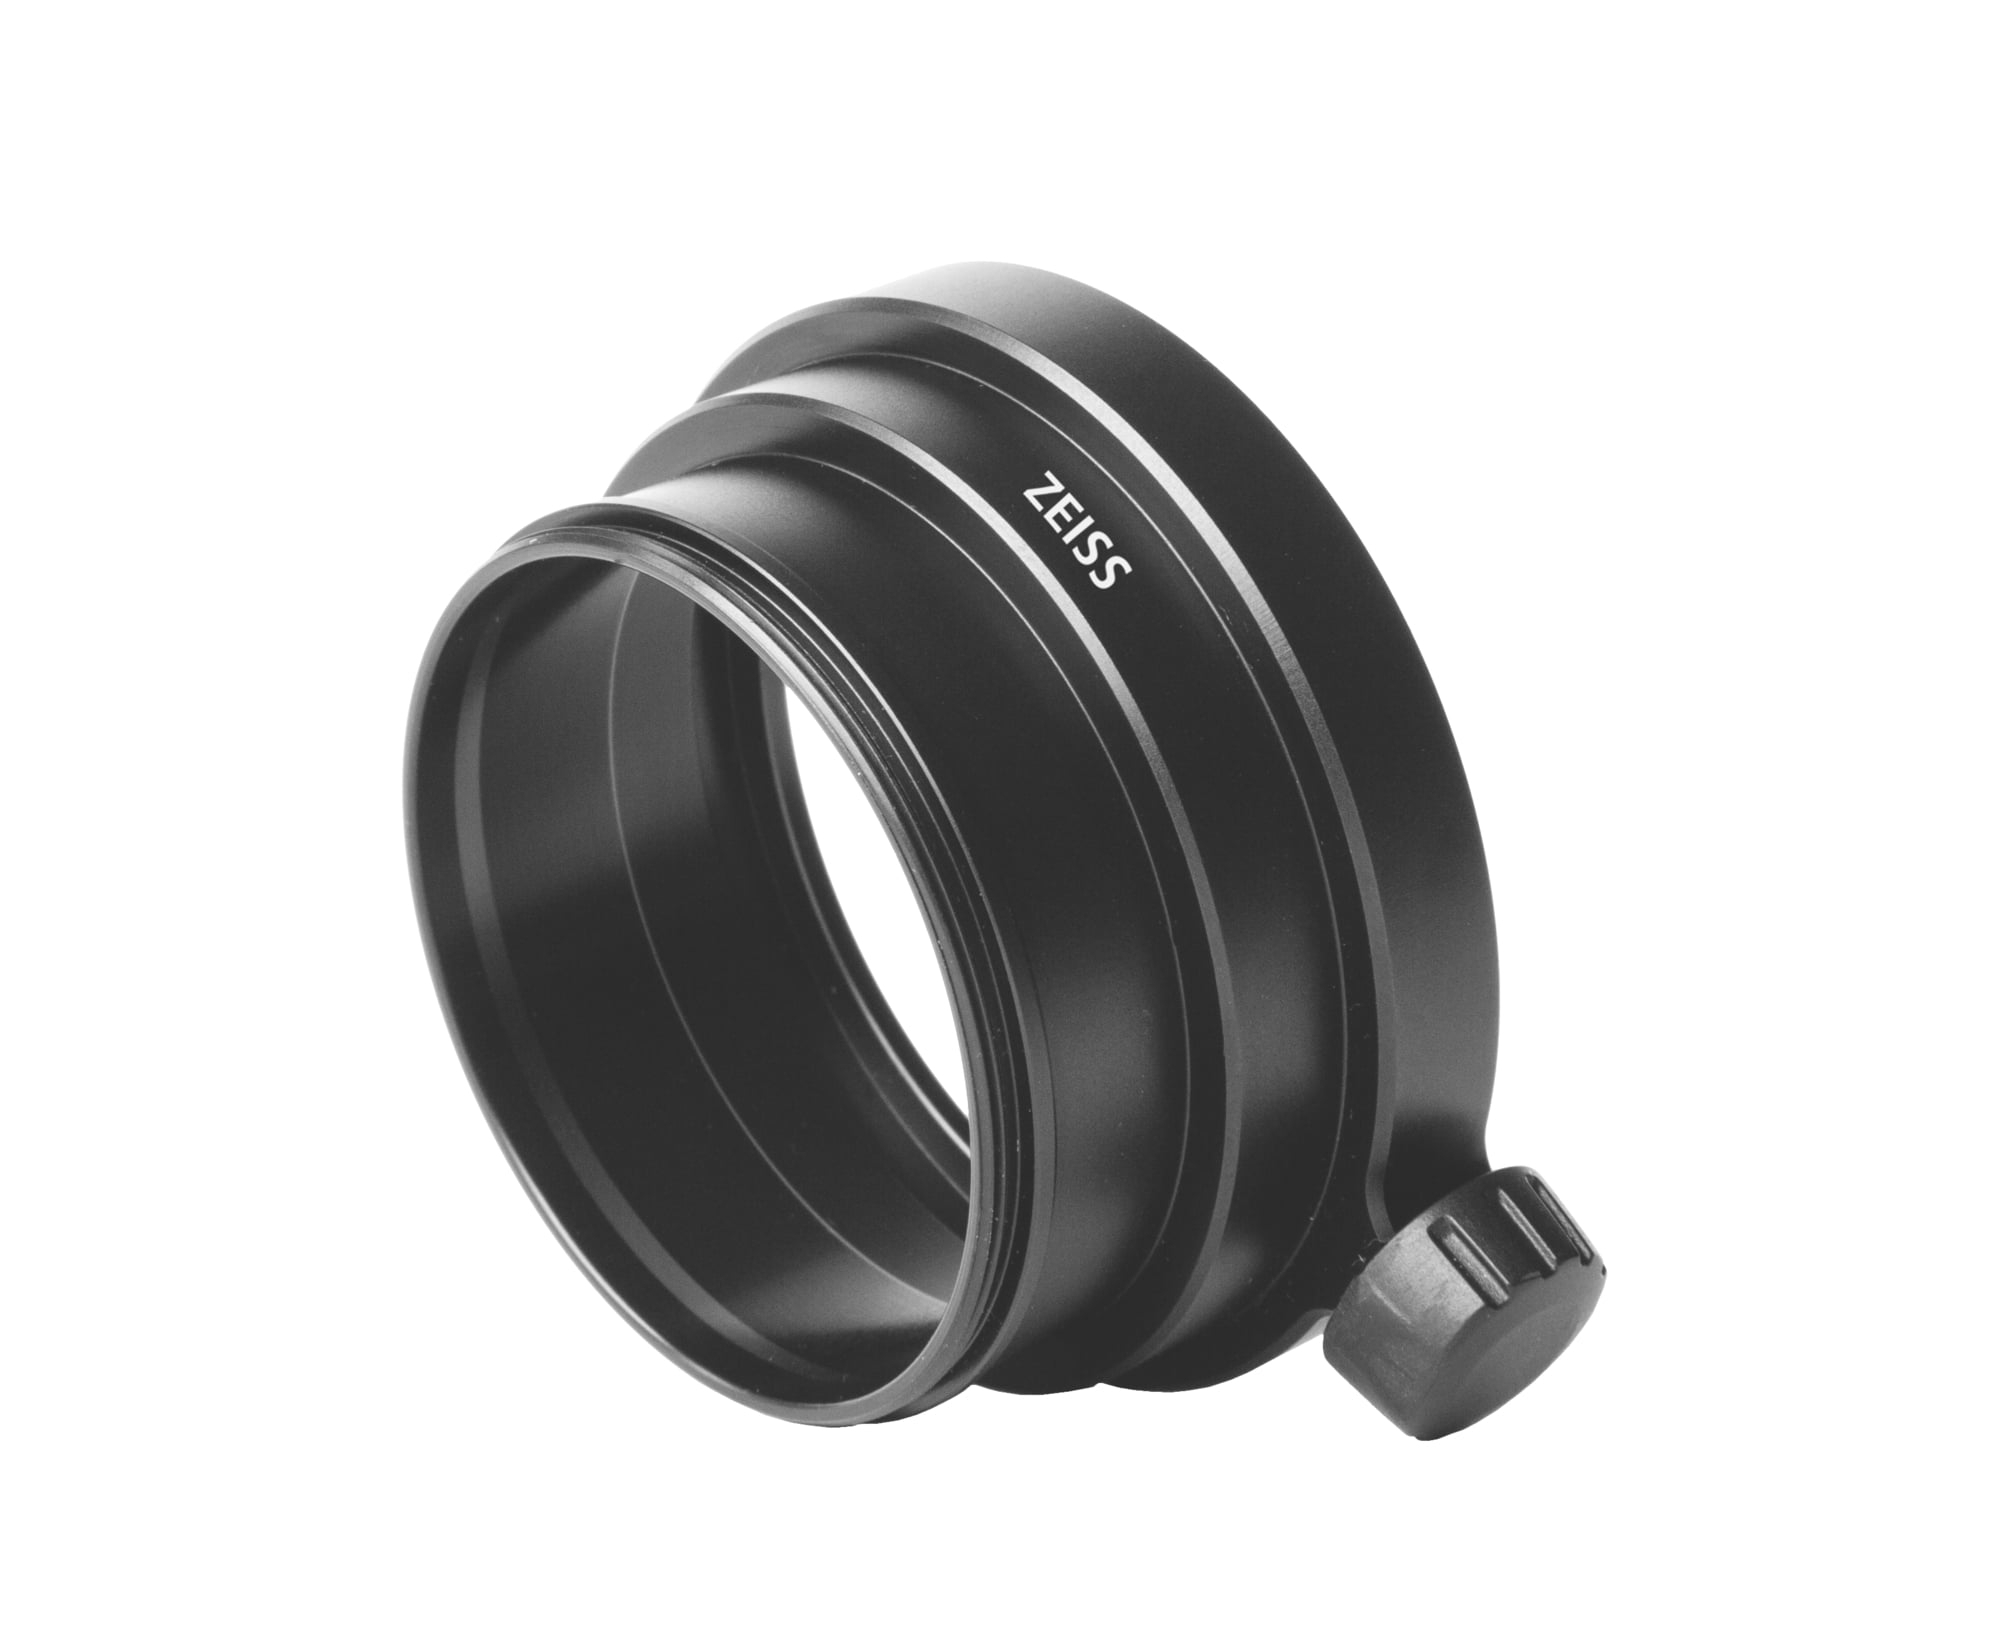 Zeiss Adapter Photo Lens M58 Conquest Gavia